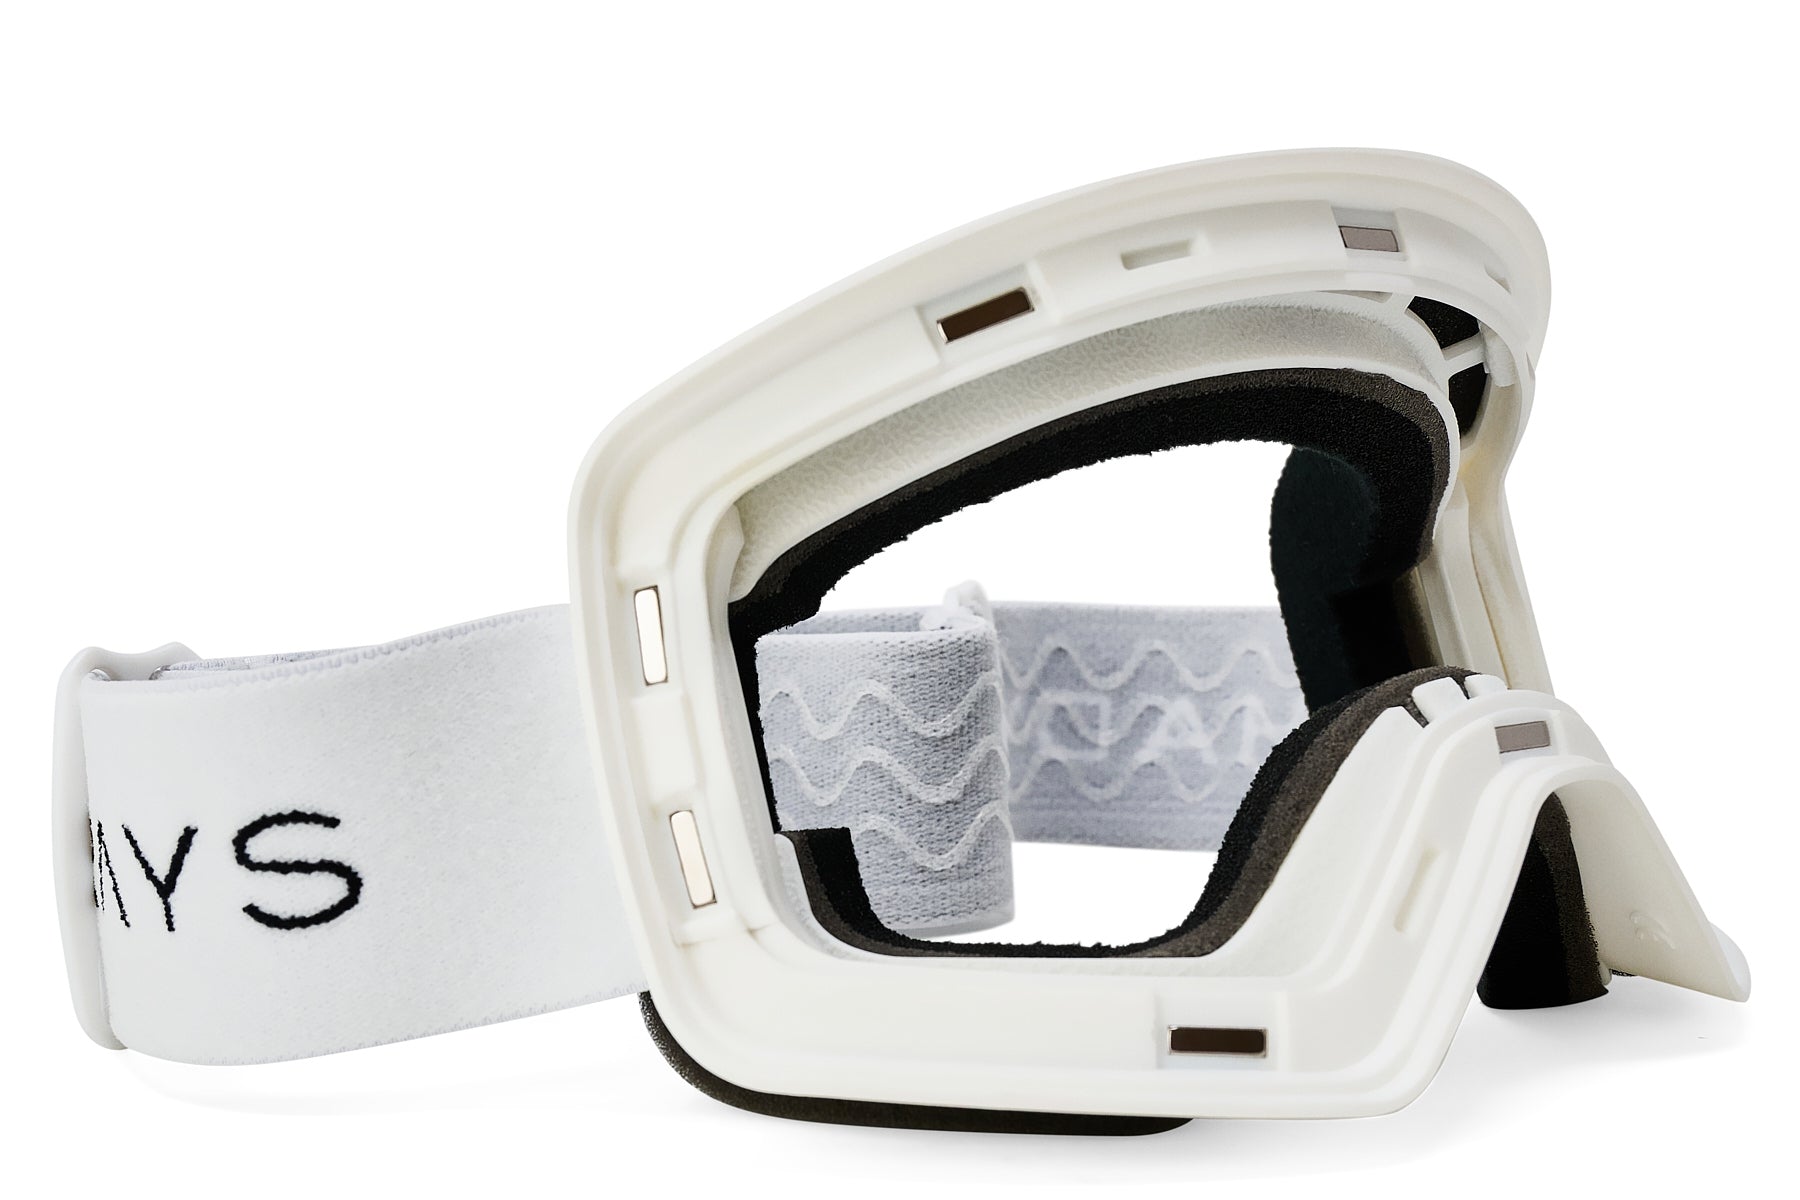 Frontier Snow Goggle - White Magnetic Frame + Strap (Lens Not Included)